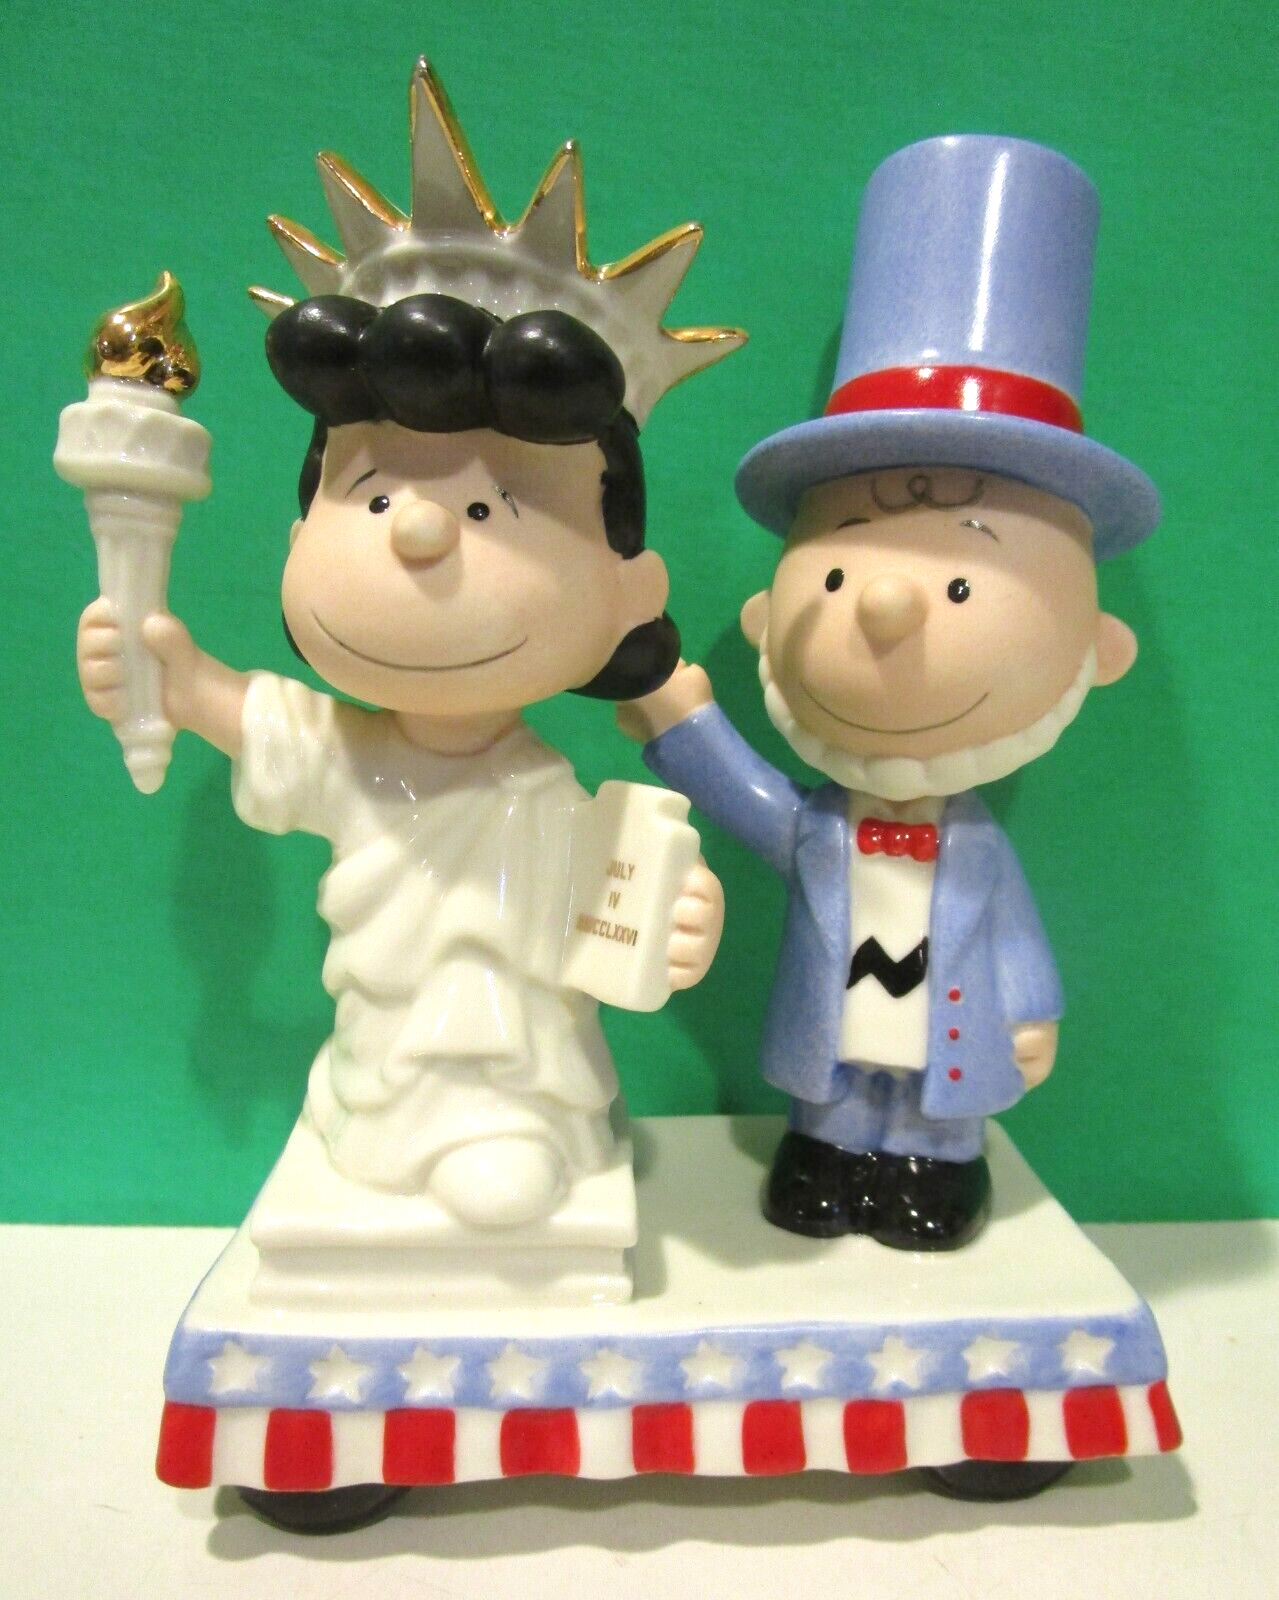 LENOX Peanuts CHARLIE BROWN LUCY FLOAT It\'s Independence Day - NEW MINT - NO BOX